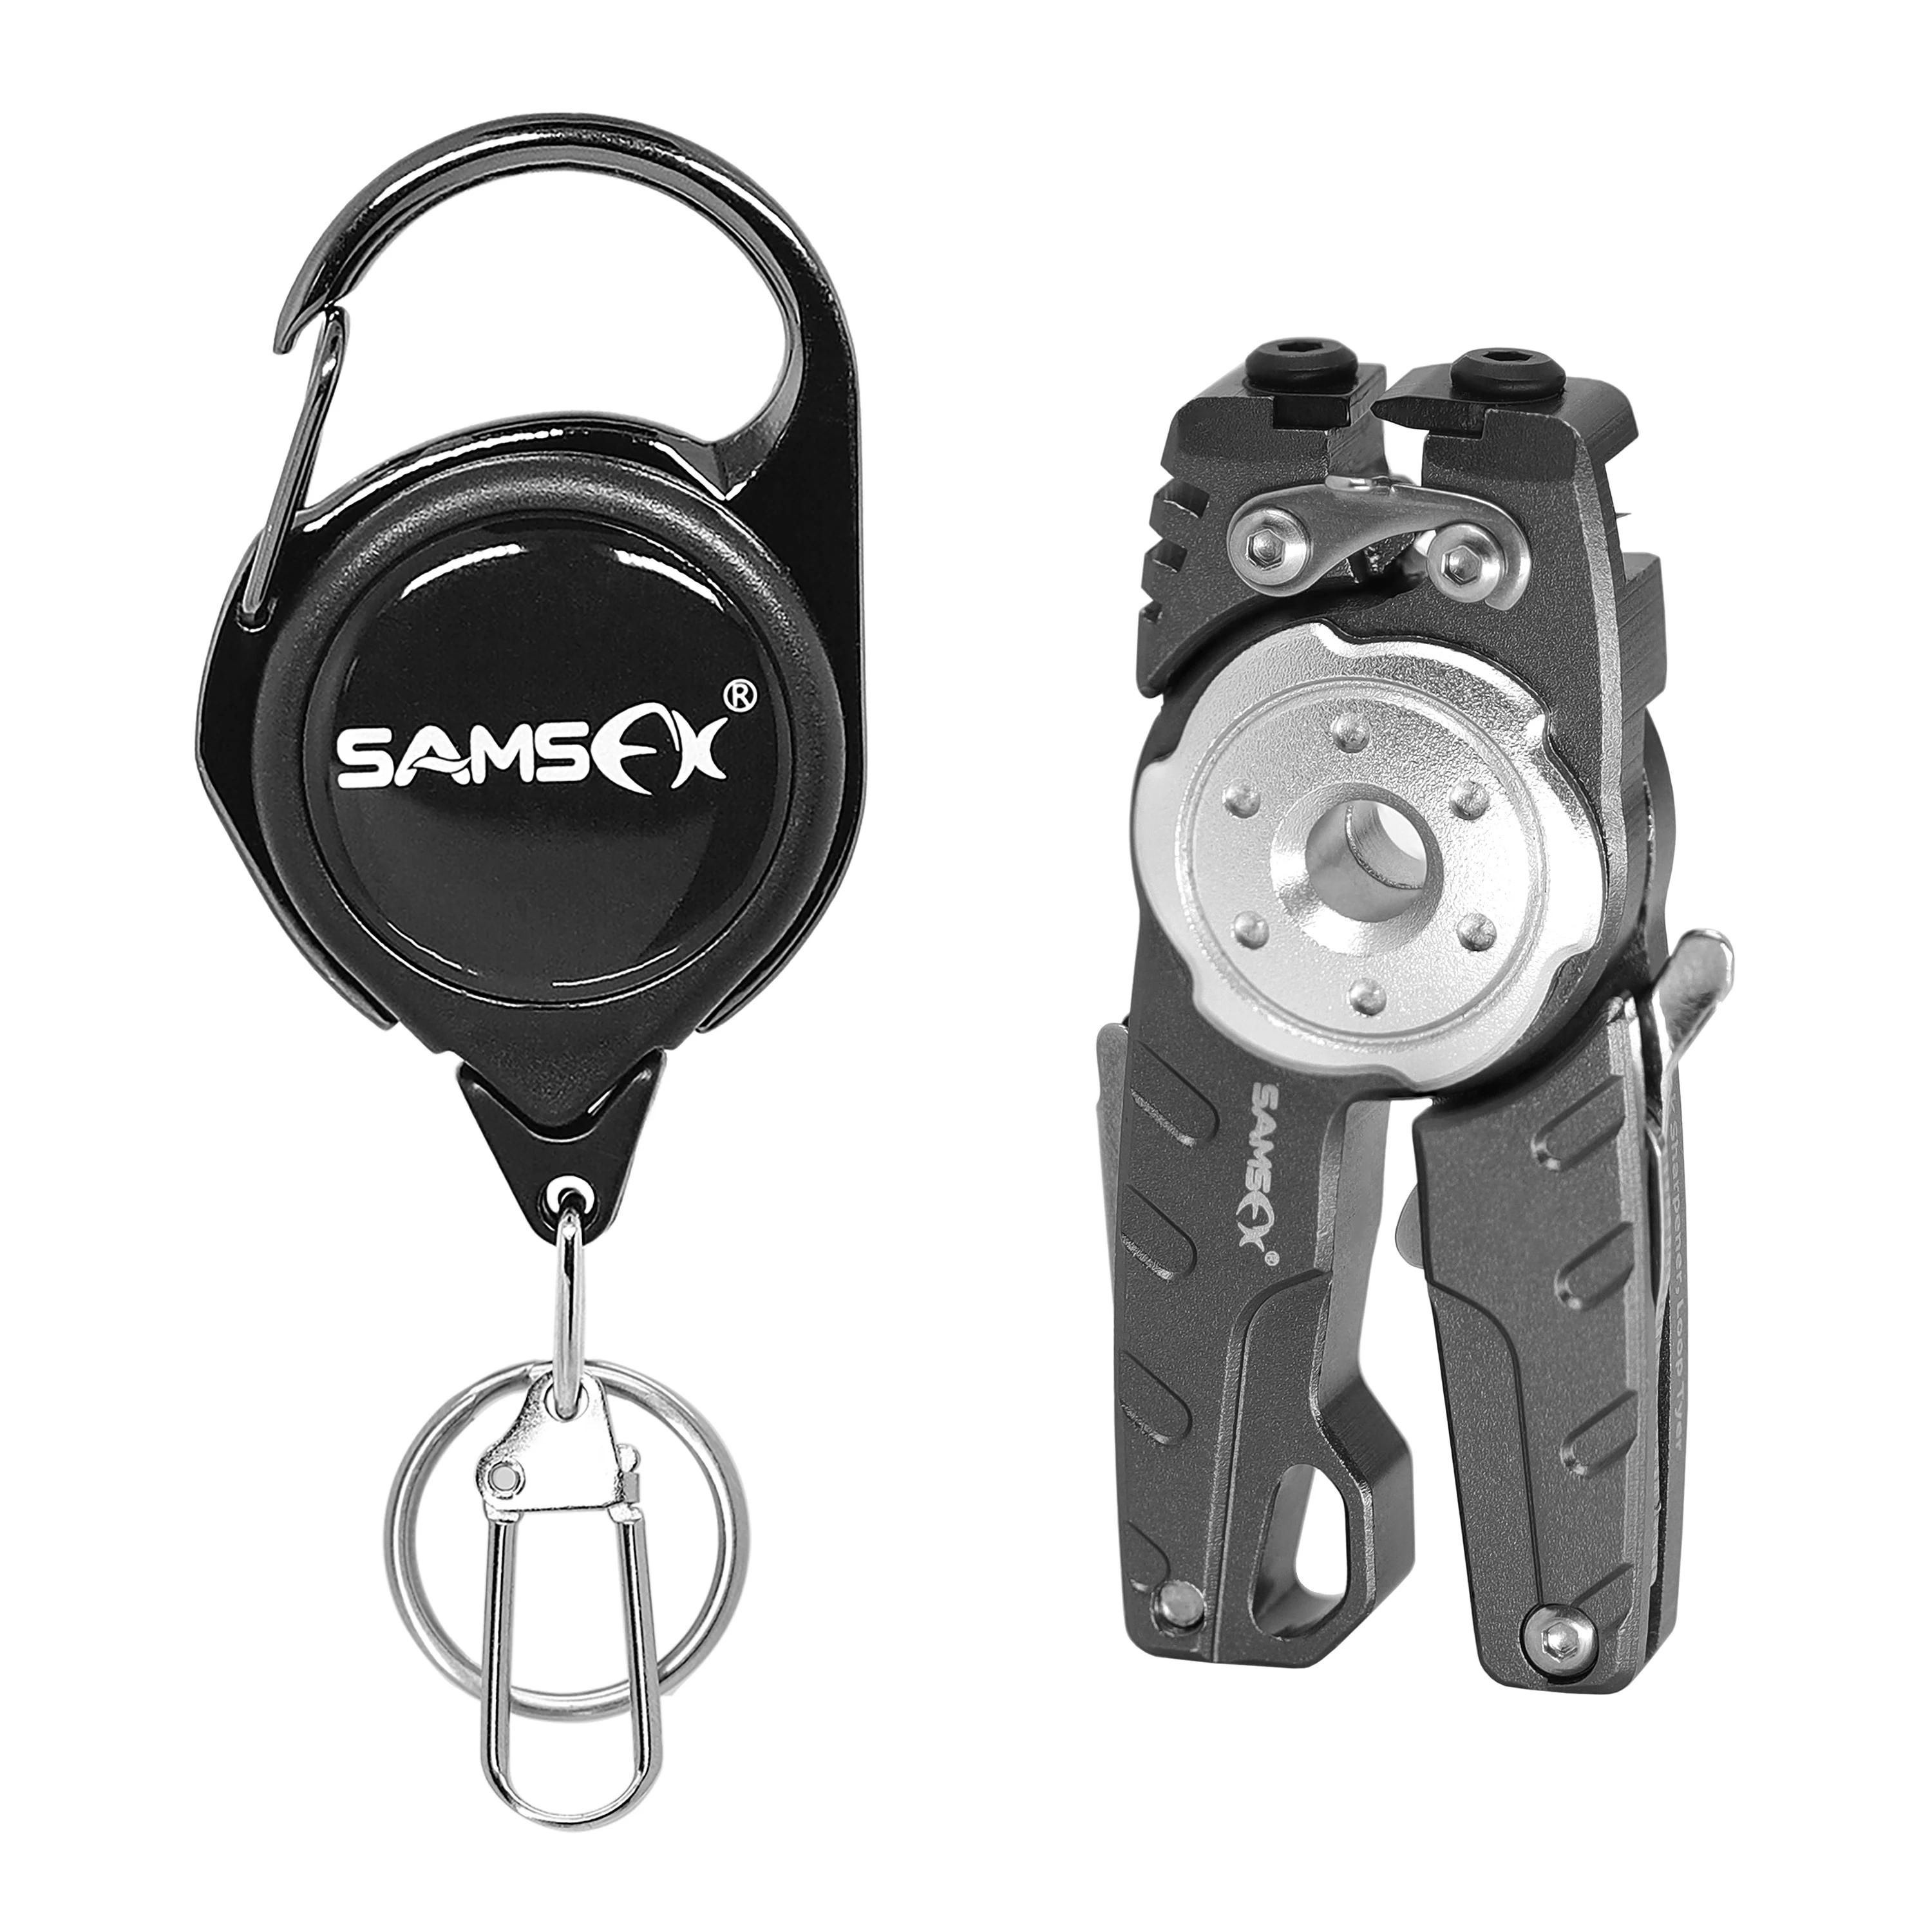 

SAMSFX 6 in 1 Fly Fishing Line Clippers with Zinger Retractor Combo Knot Tying Tool Nippers Snips Clippers Braided line Cutter